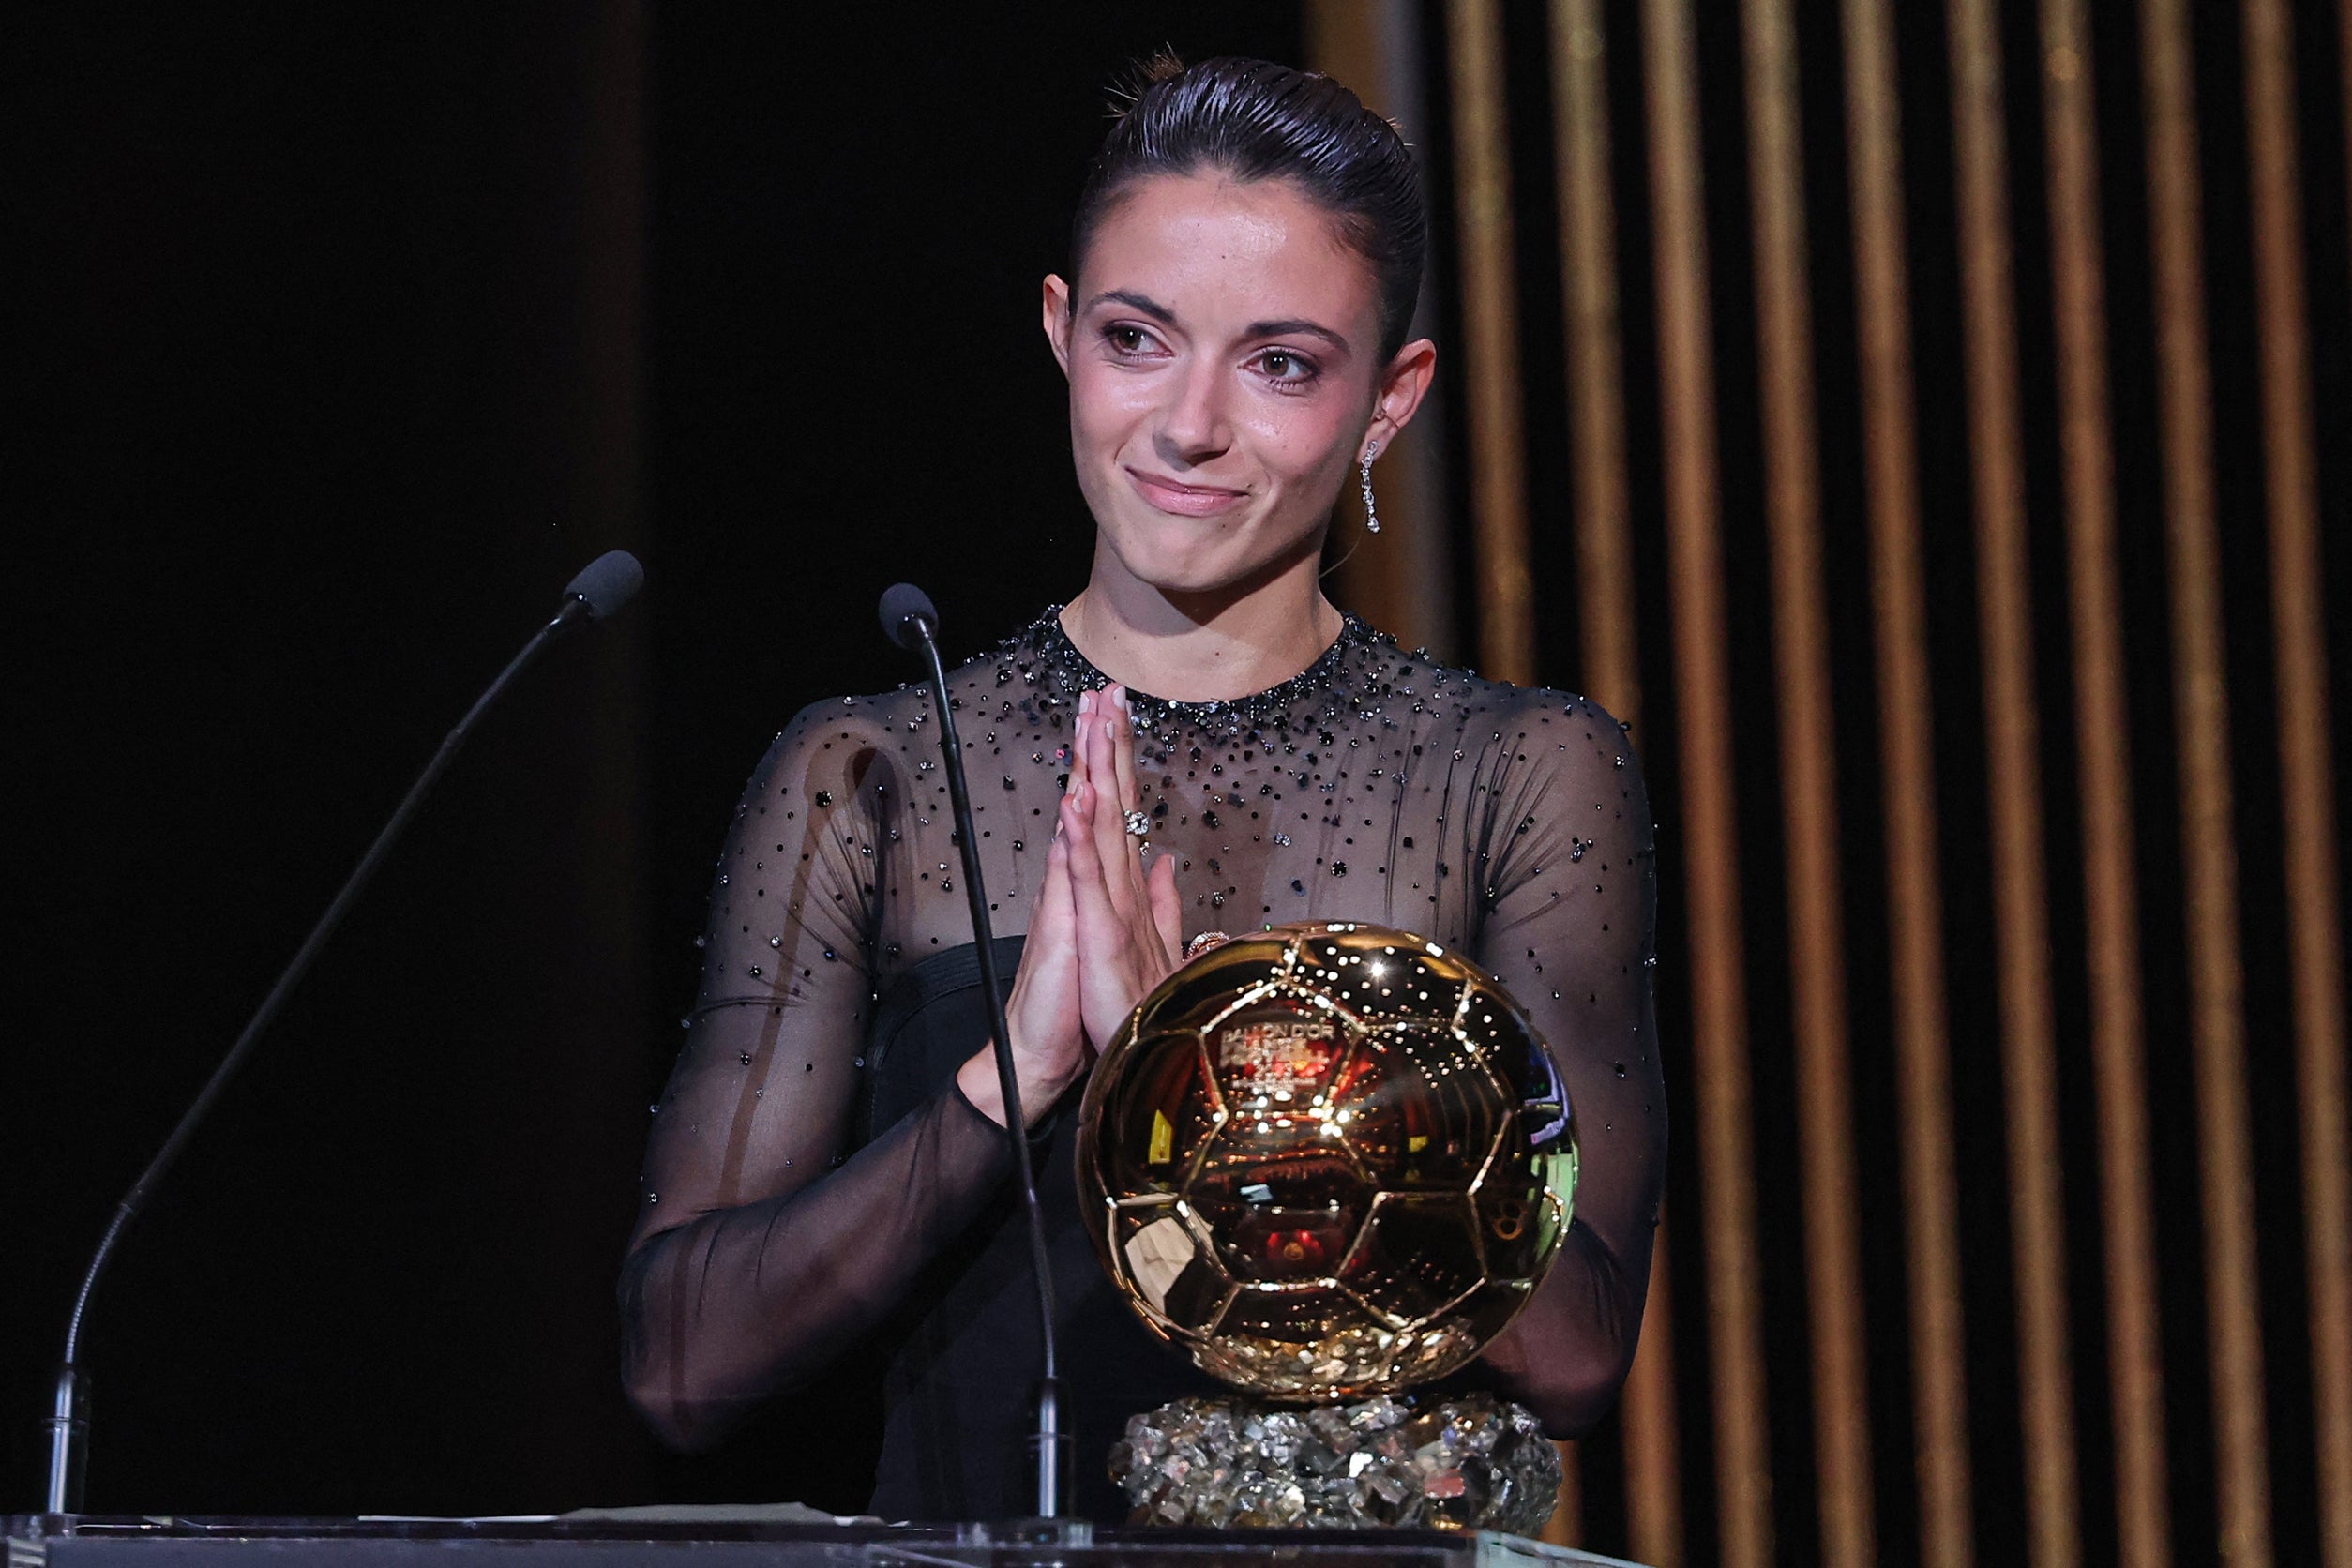 Aitana Bonmati was awarded the Ballon d’Or after winning the World Cup with Spain and Champions League with Barcelona